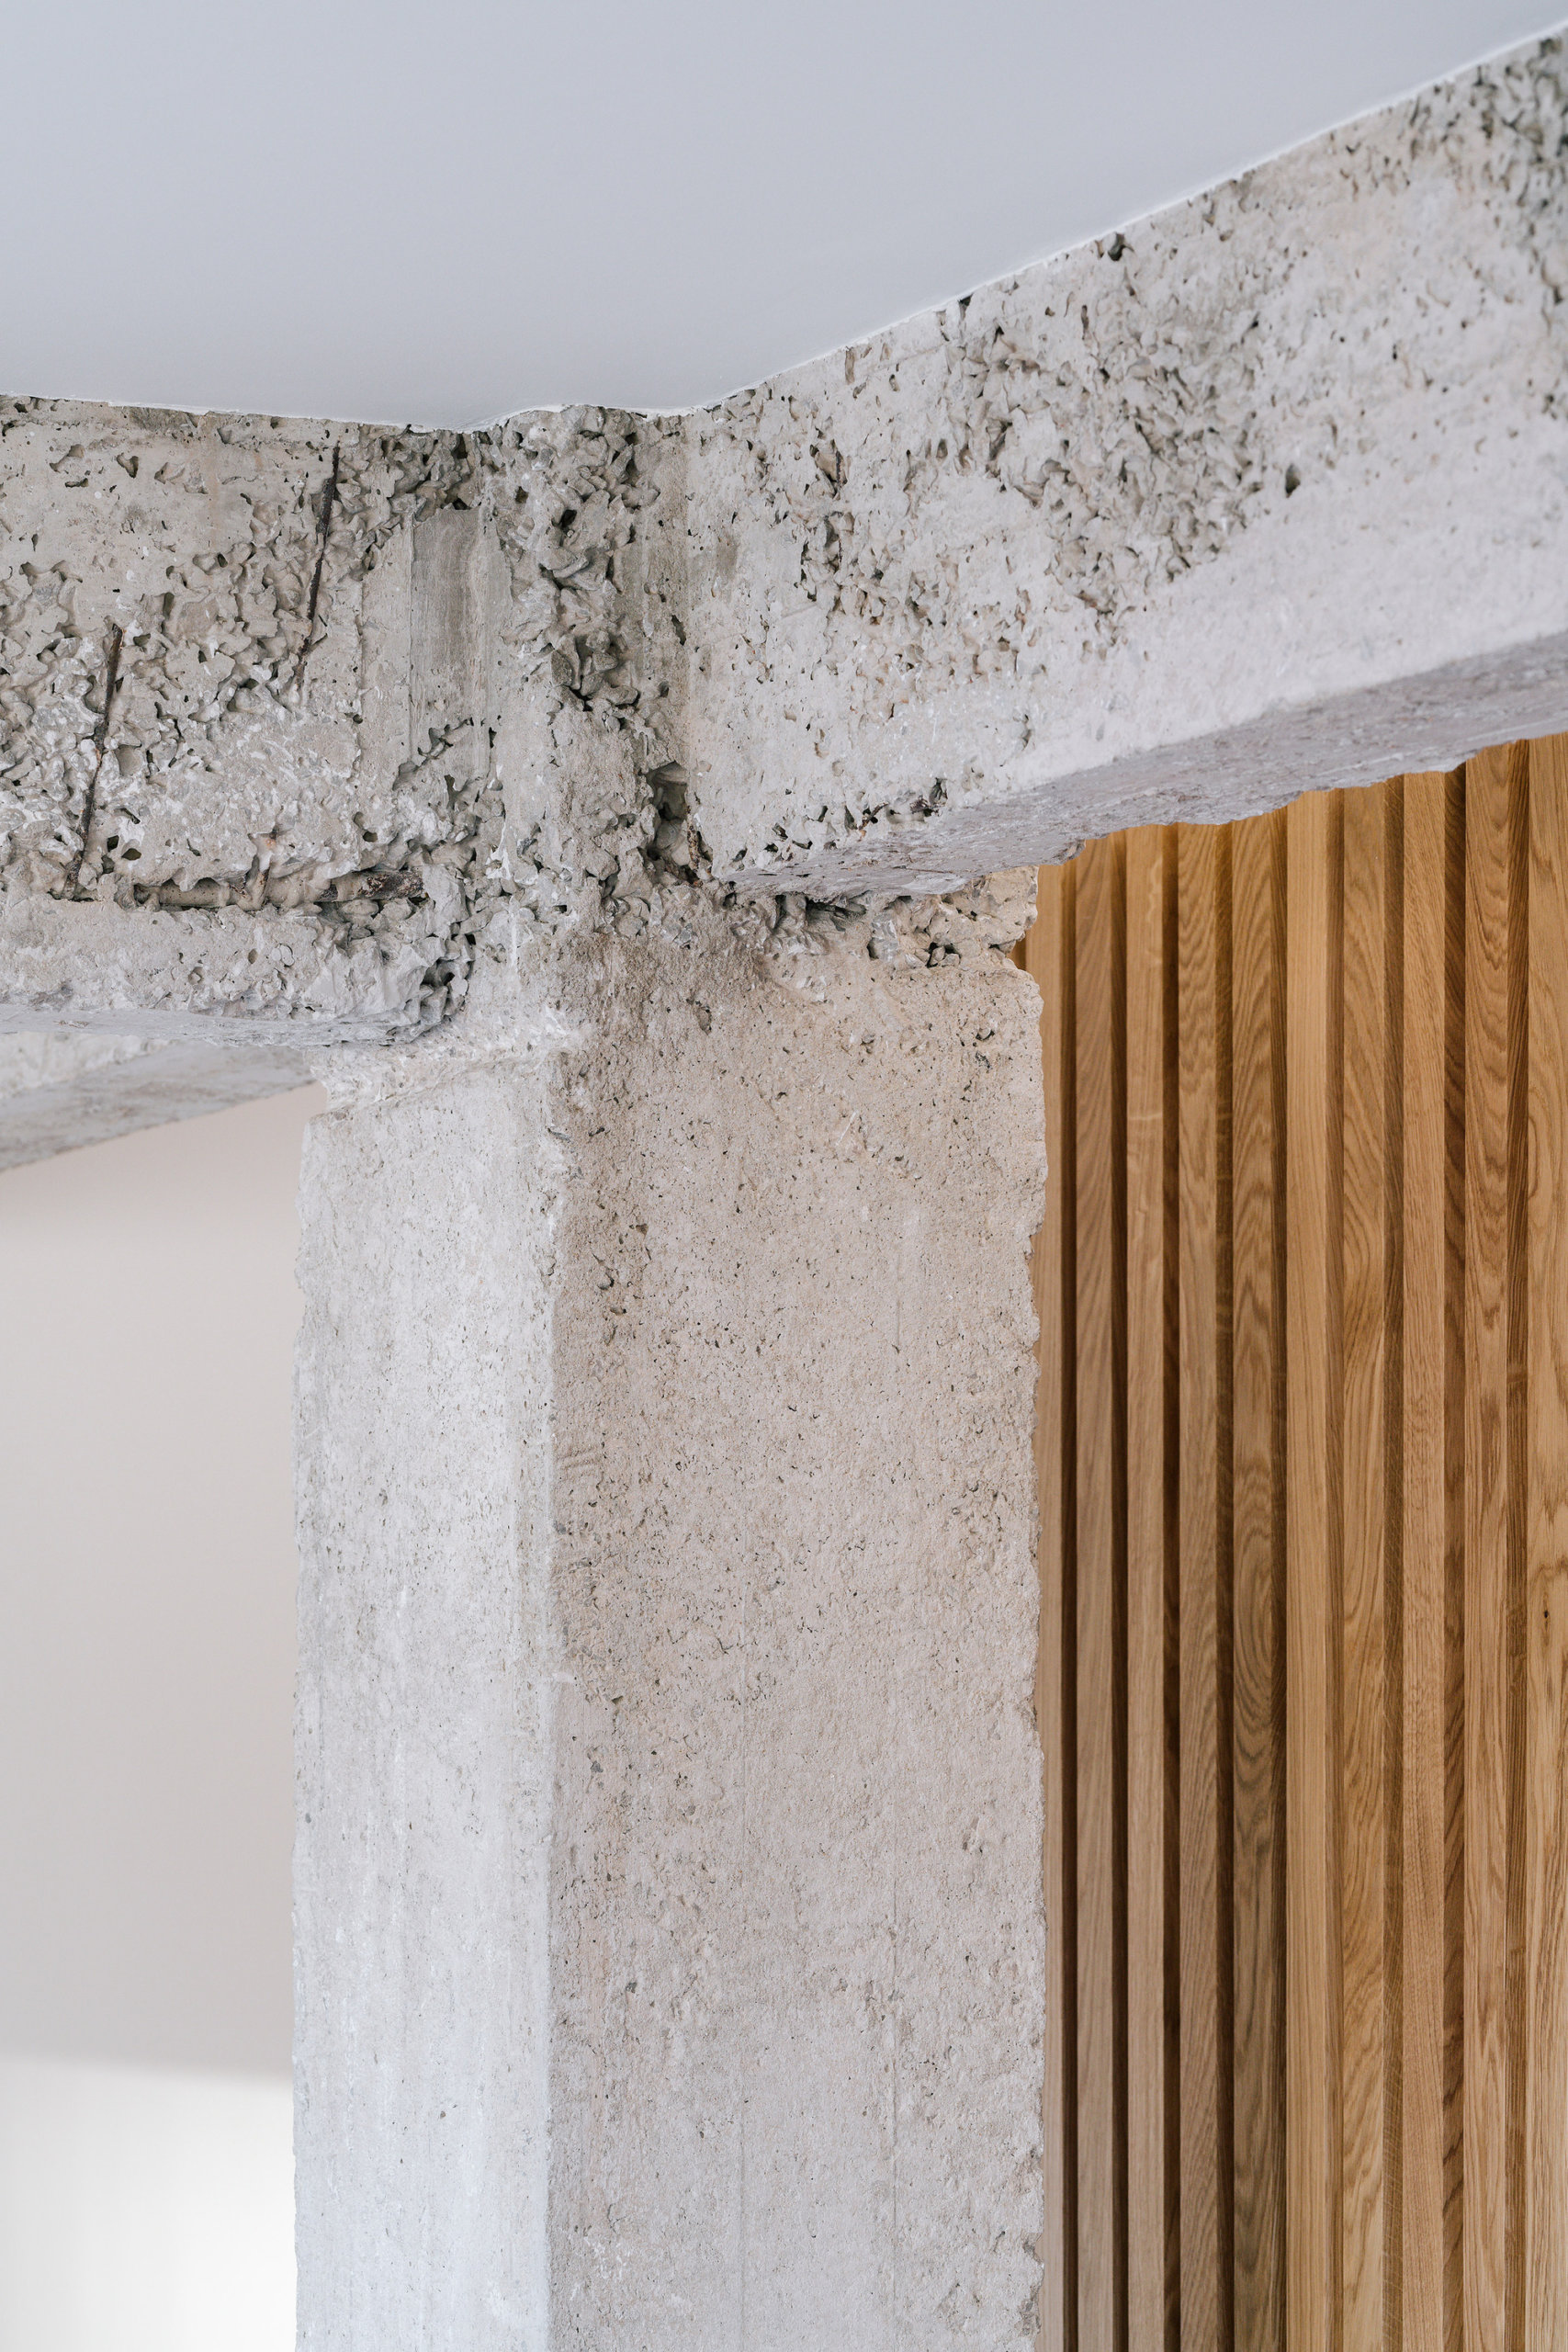 Combining-the-rugged-concrete-finishes-inside-the-apartment-with-warmth-of-wood-92411-scaled